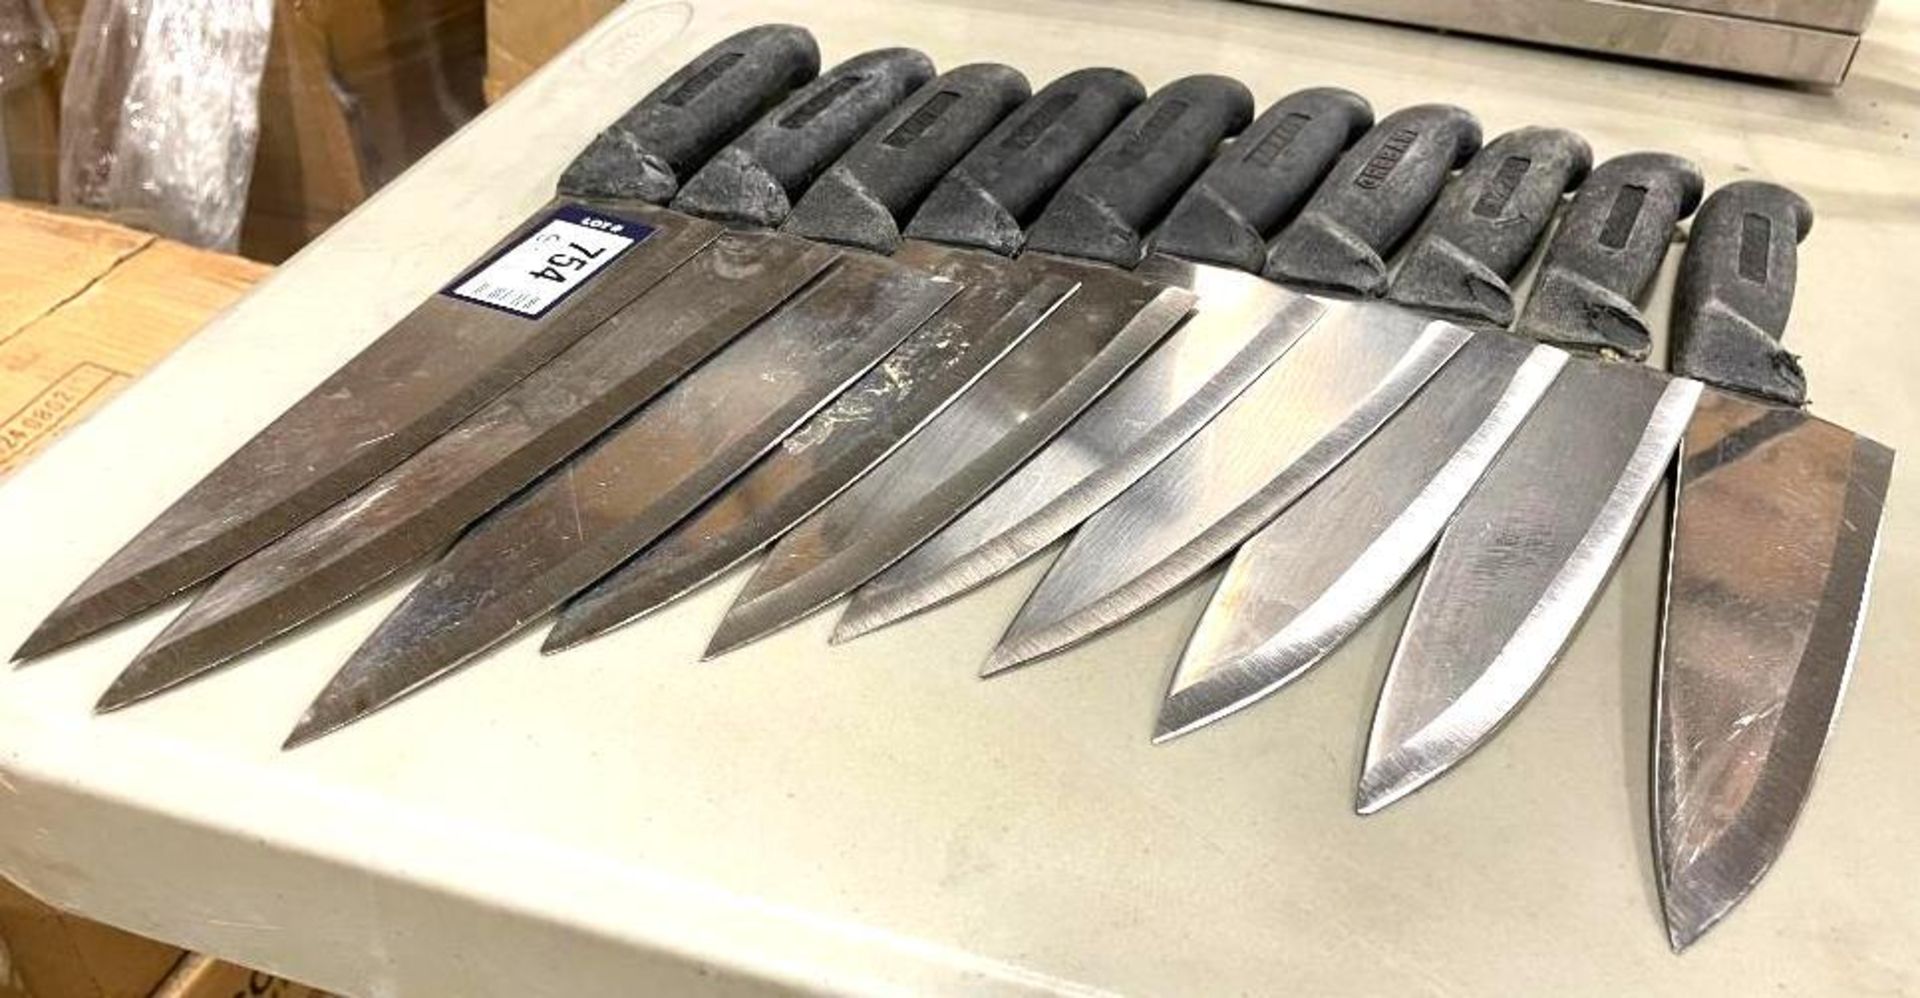 LOT OF 10 USED SHARPENED KNIVES - Image 3 of 3